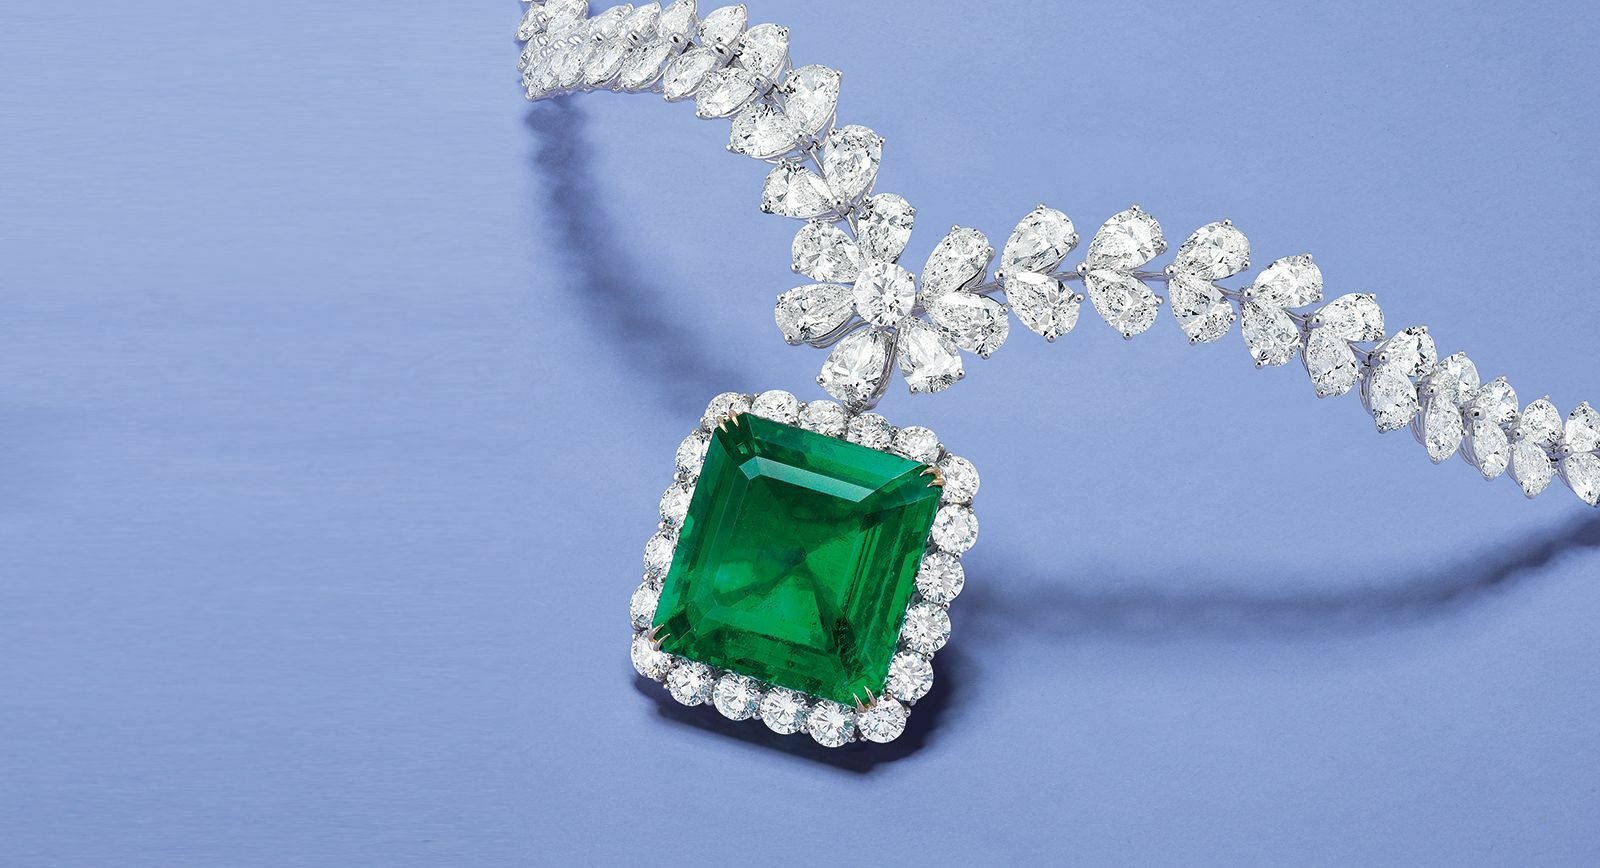 A Zambian emerald and diamond necklace from the Phillips Hong Kong Treasures from Zambia: An Exceptional Emerald Collection Auction, November 2021